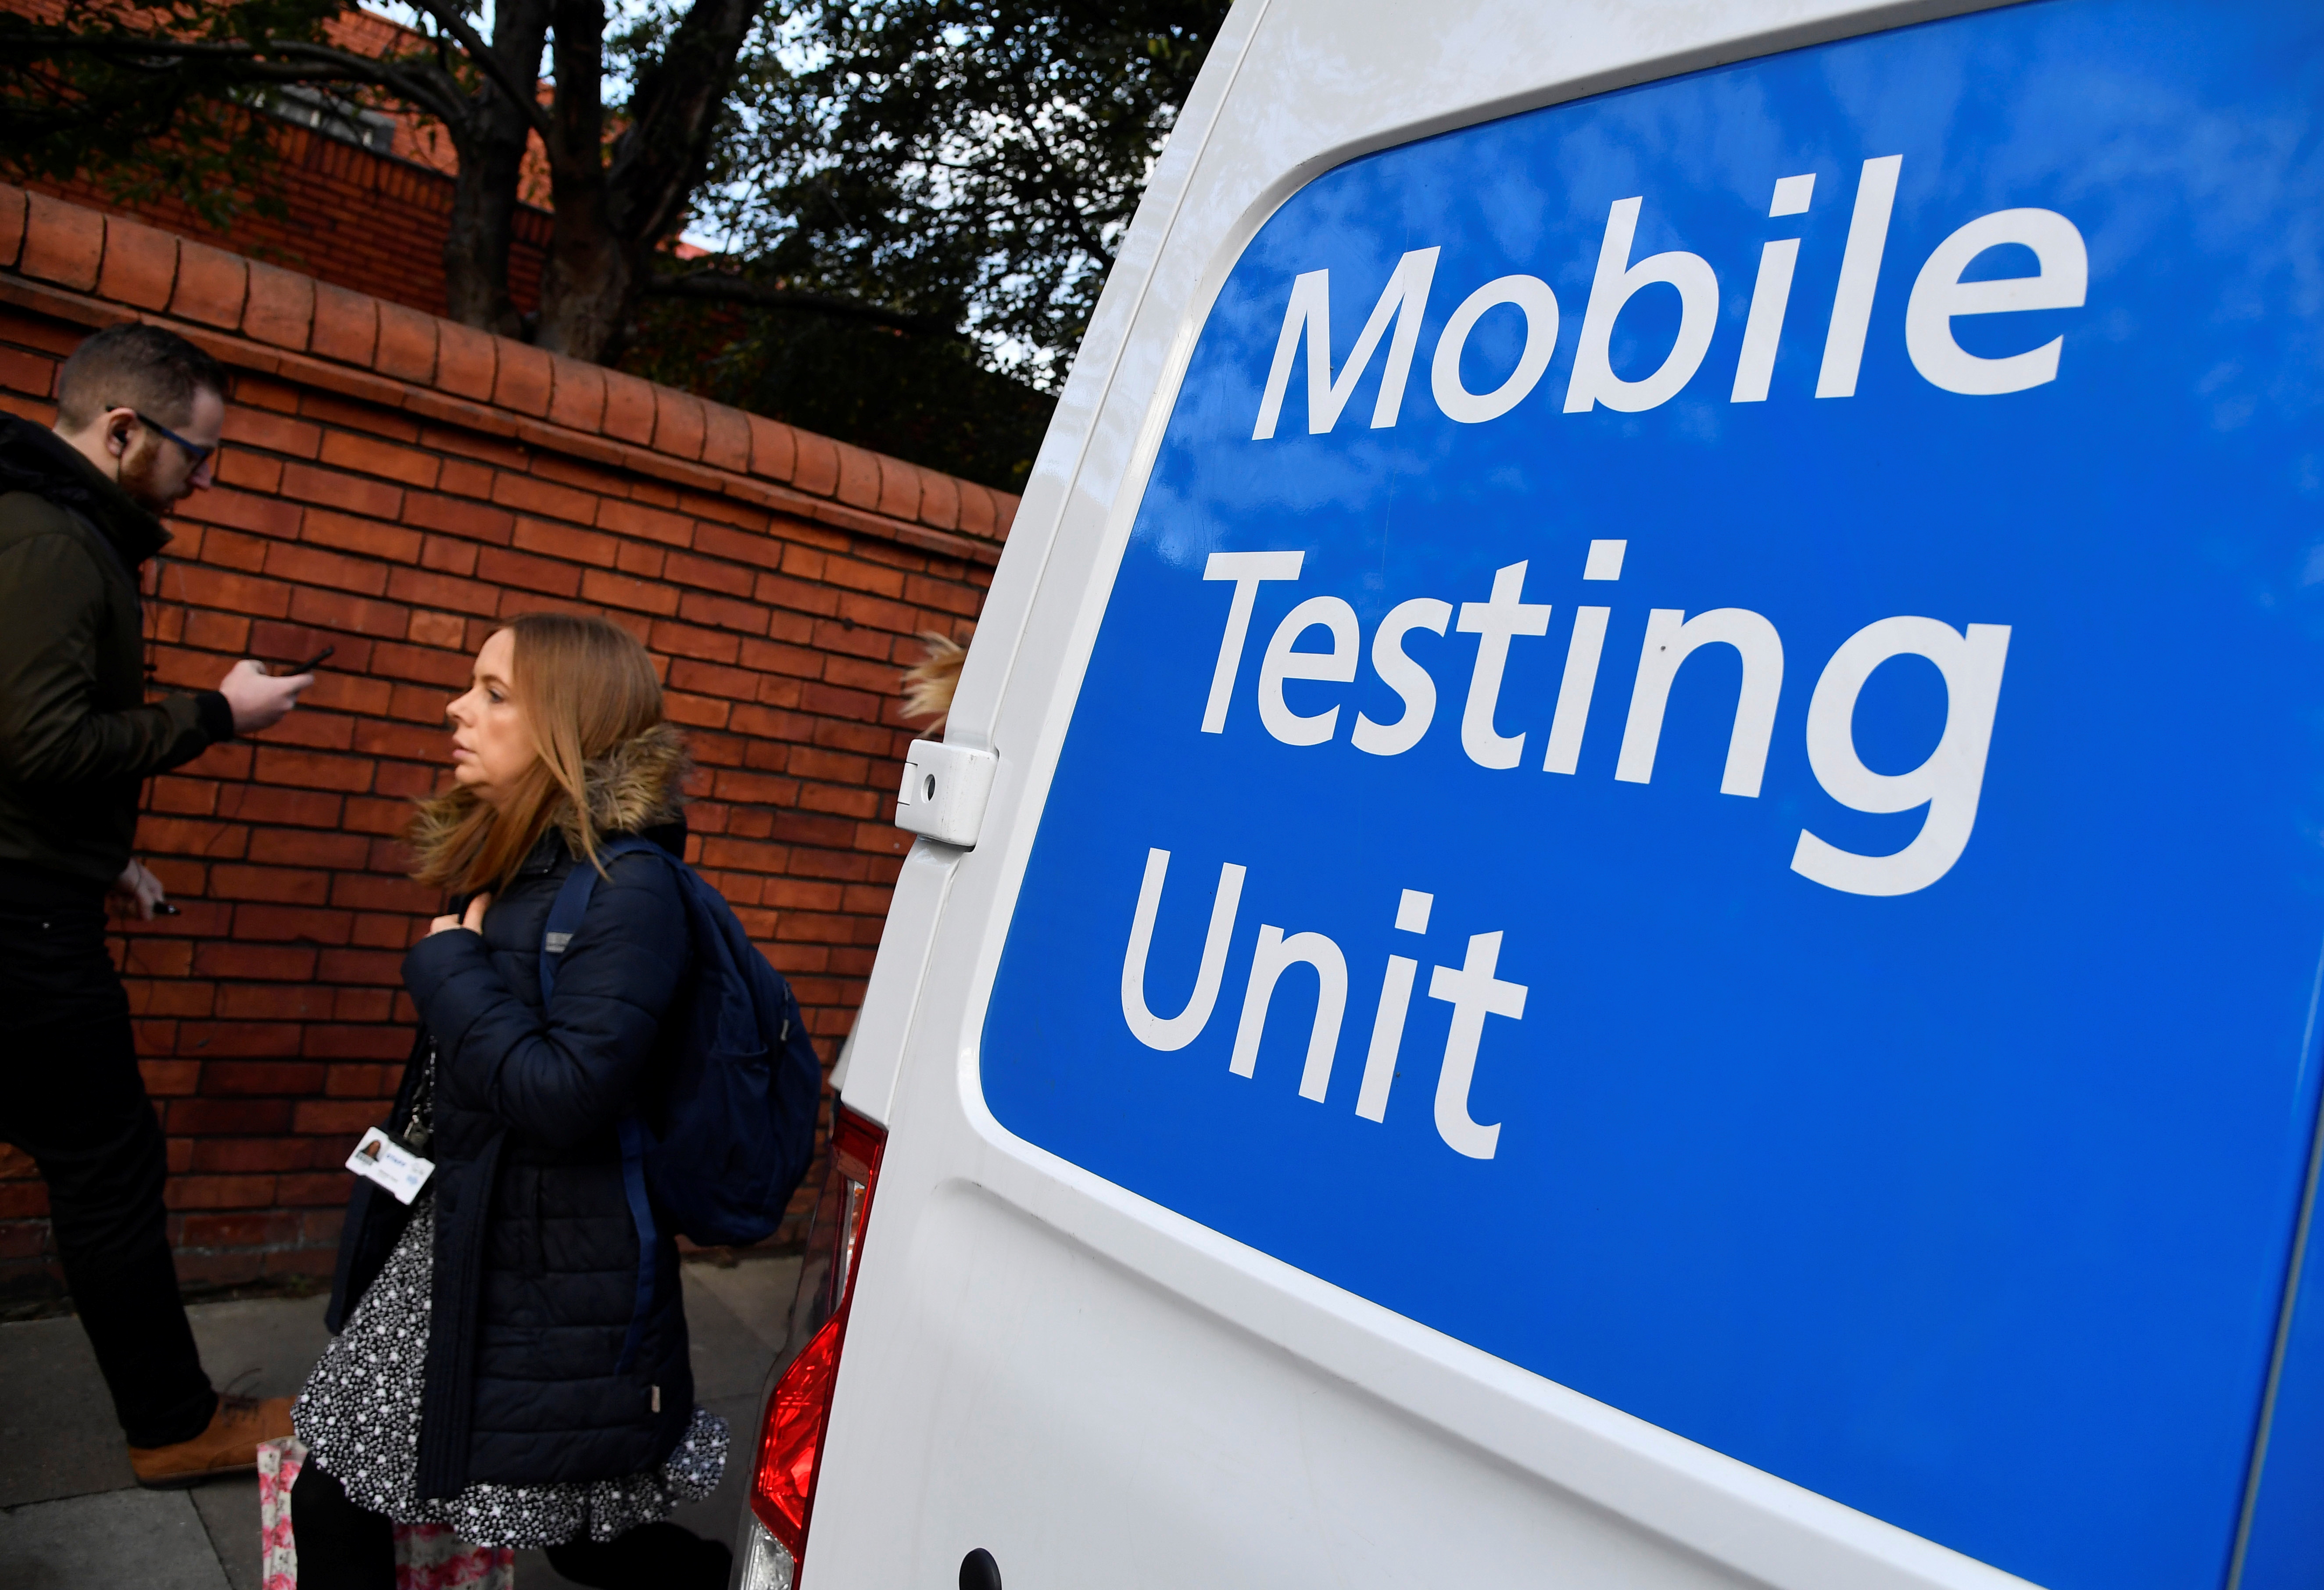 People walk past a COVID-19 Mobile Testing Unit van, amidst the spread of the coronavirus disease (COVID-19), in London